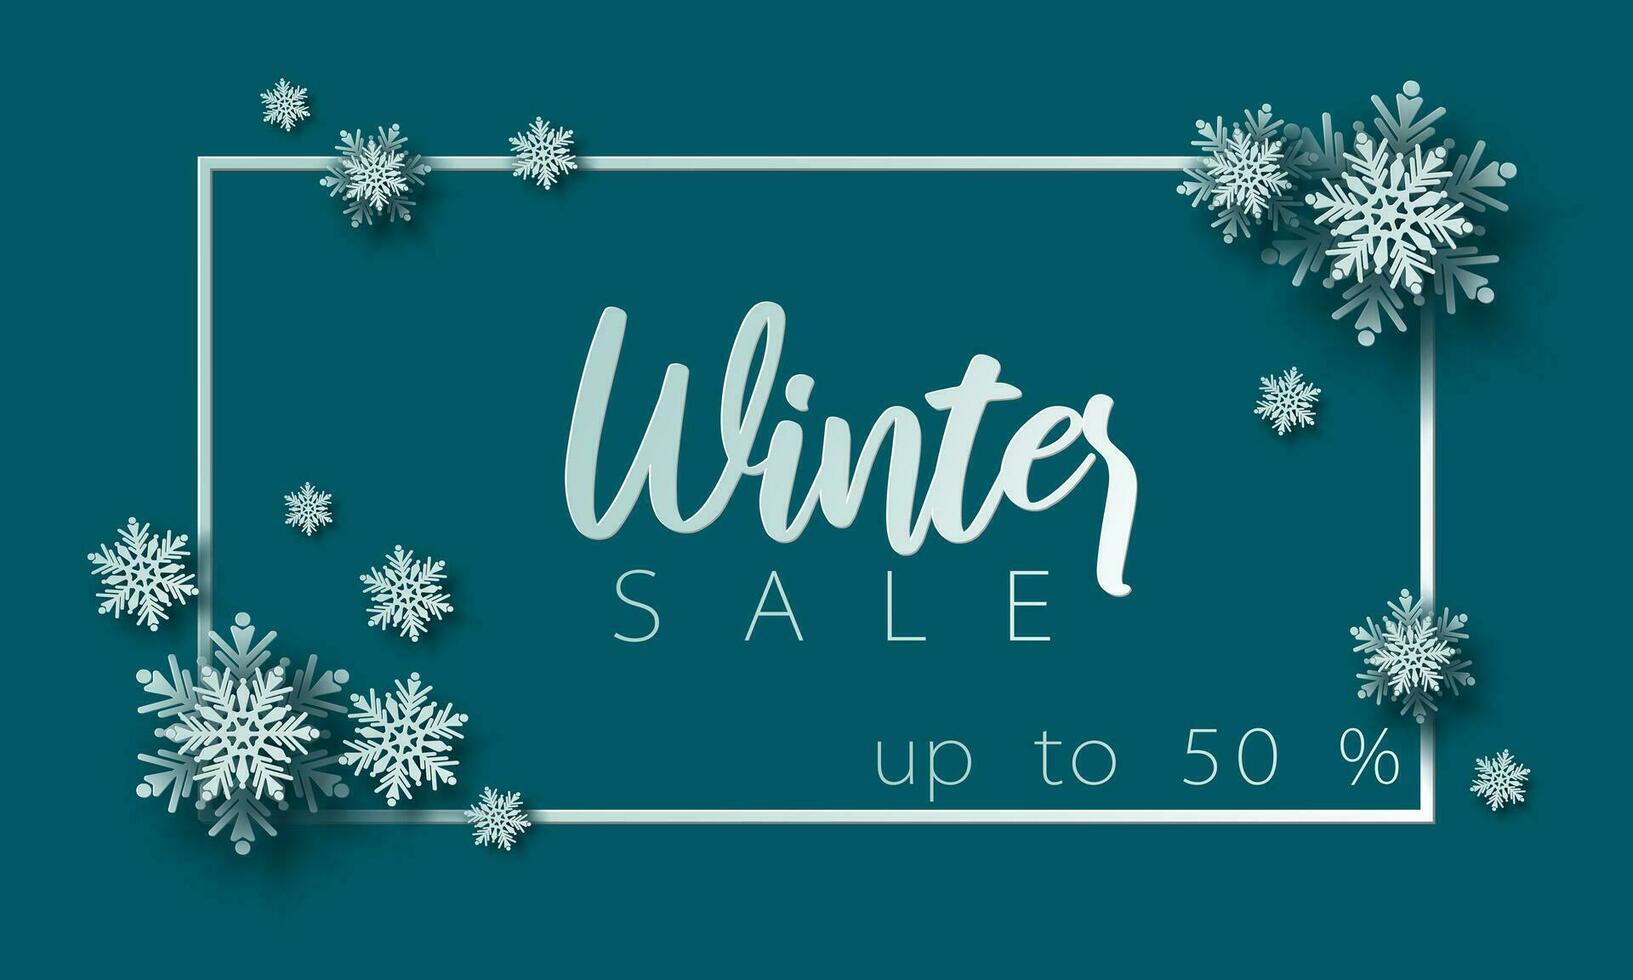 Winter sale banner with paper cut snowflakes. Christmas design 3D illustration on teal colored background for presentation, banner, cover, web, flyer, card, sale, poster, slide and social media. vector